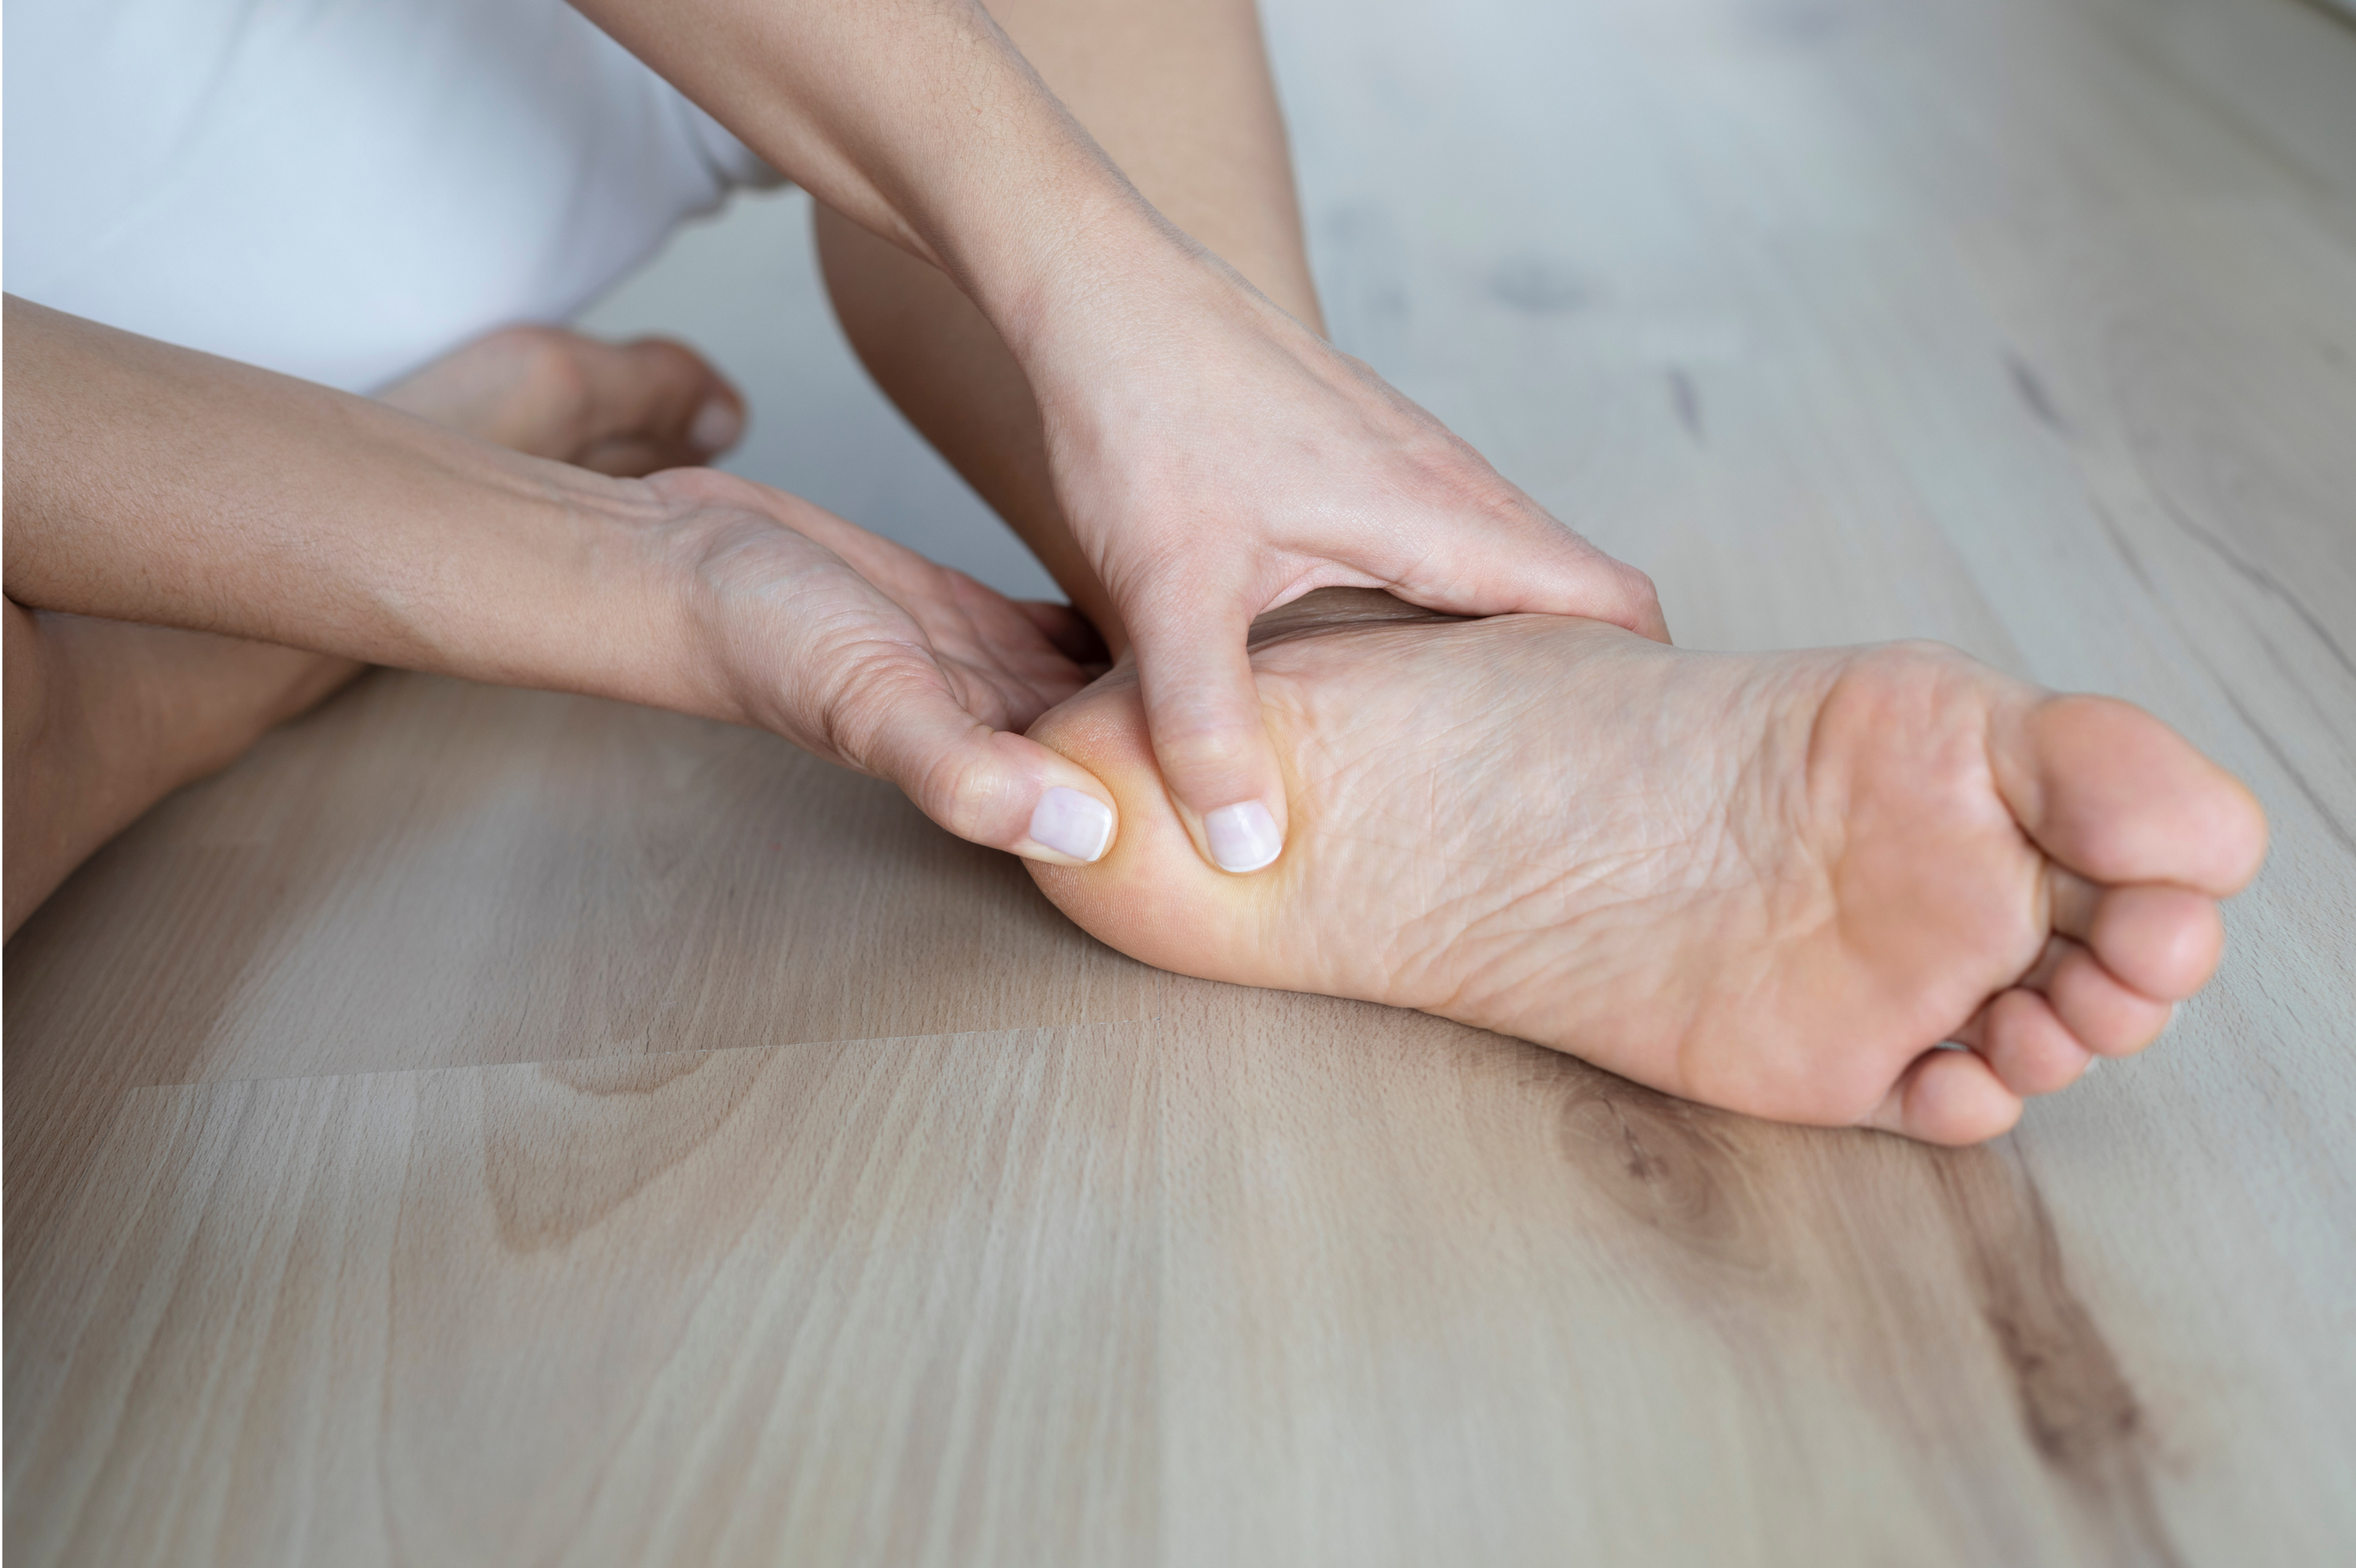 You can tell the difference between plantar fasciitis and heel fat pad pain by pressing under the heel.